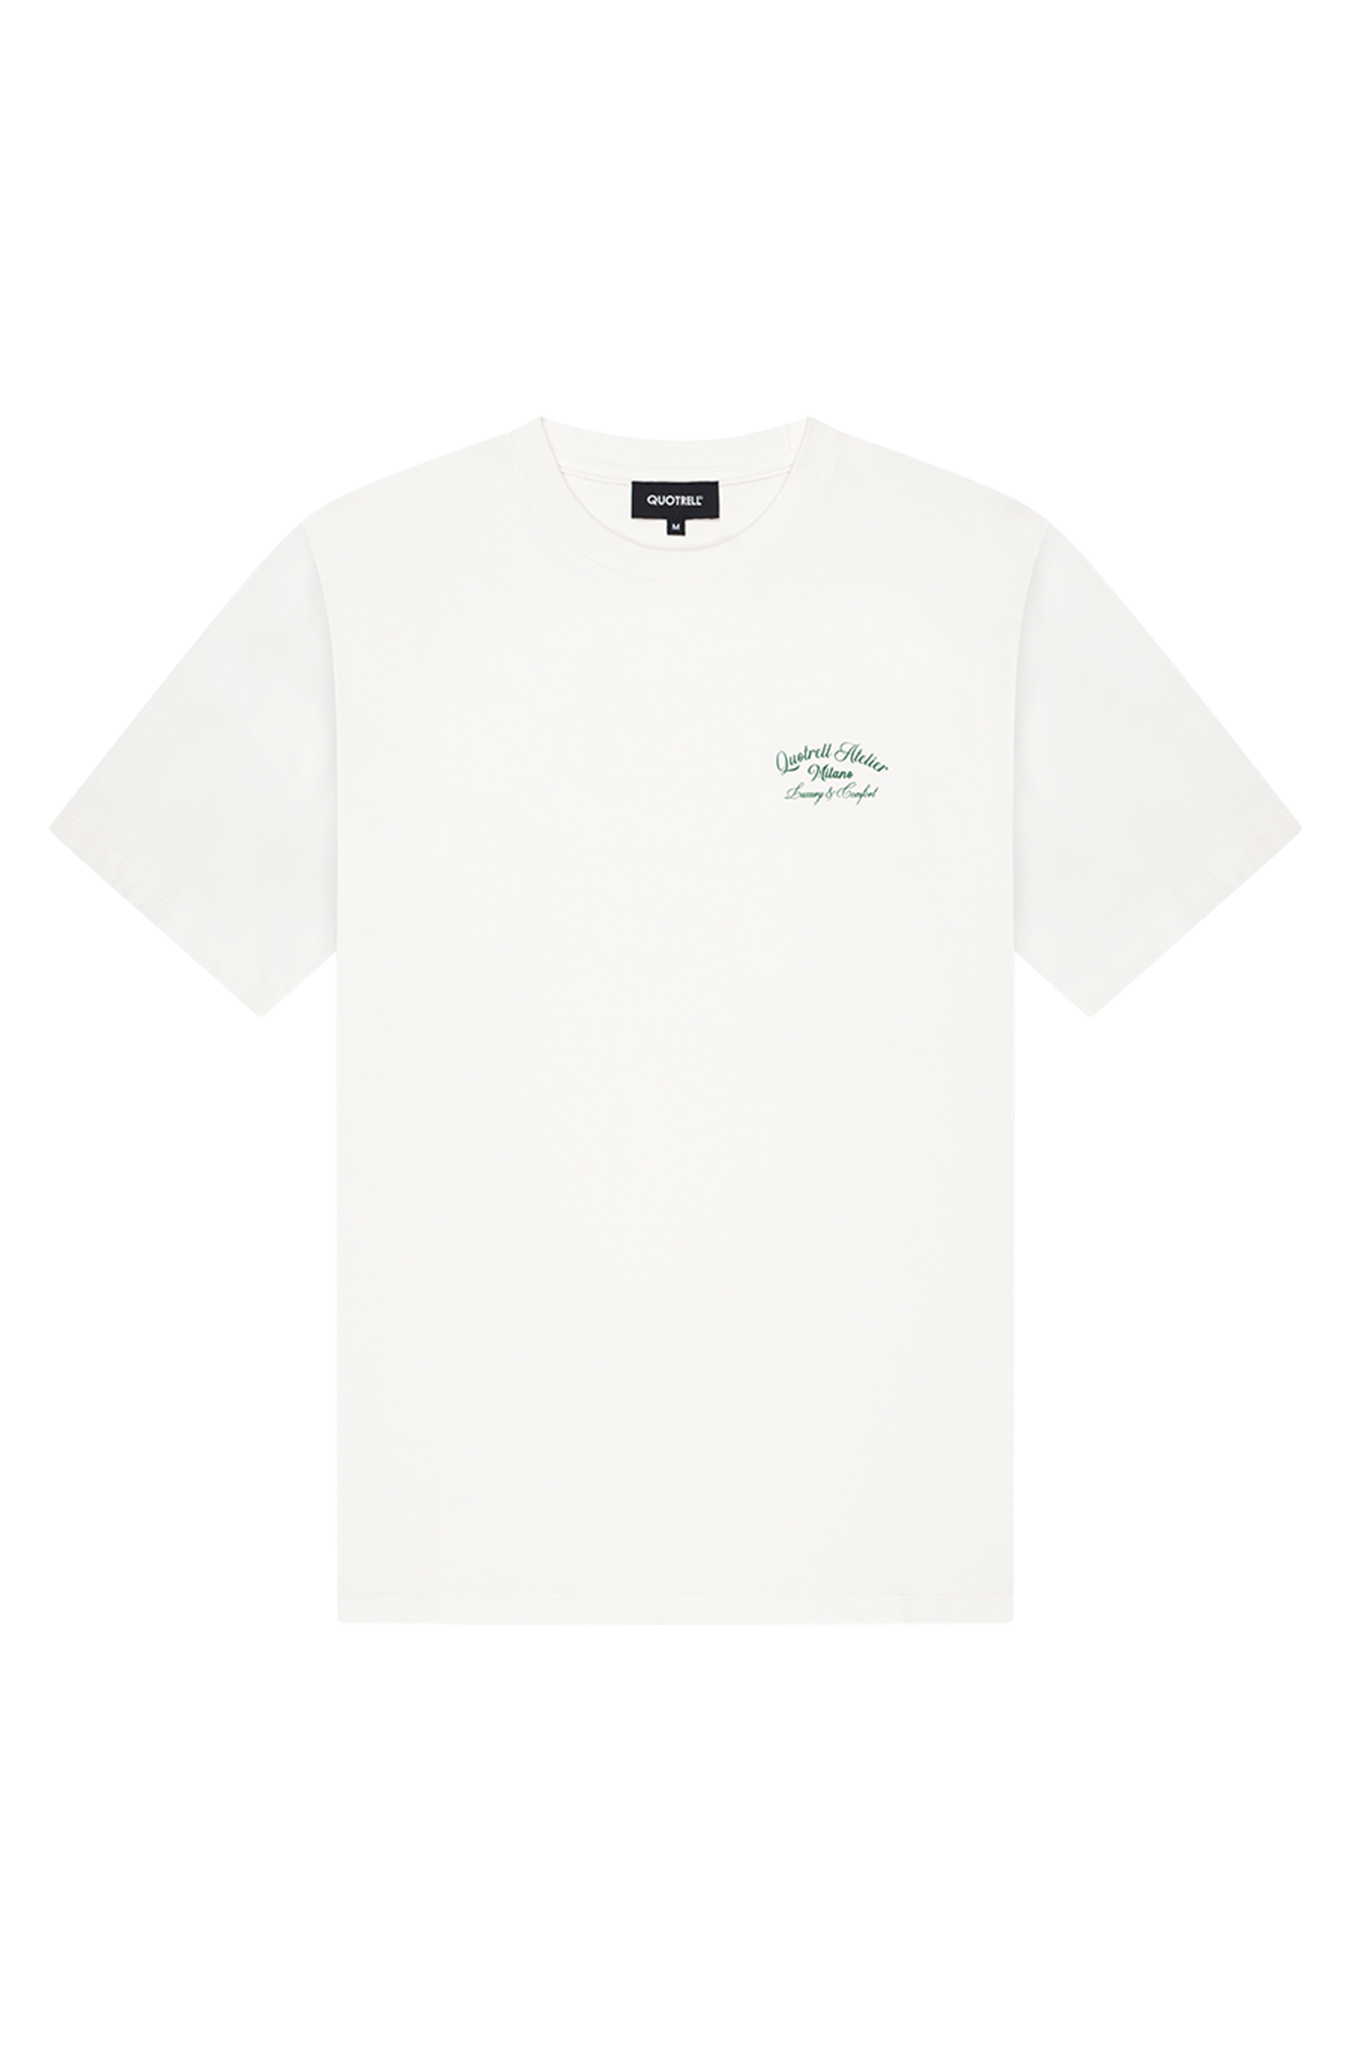 Quotrell atelier milano t-shirt - off white/green